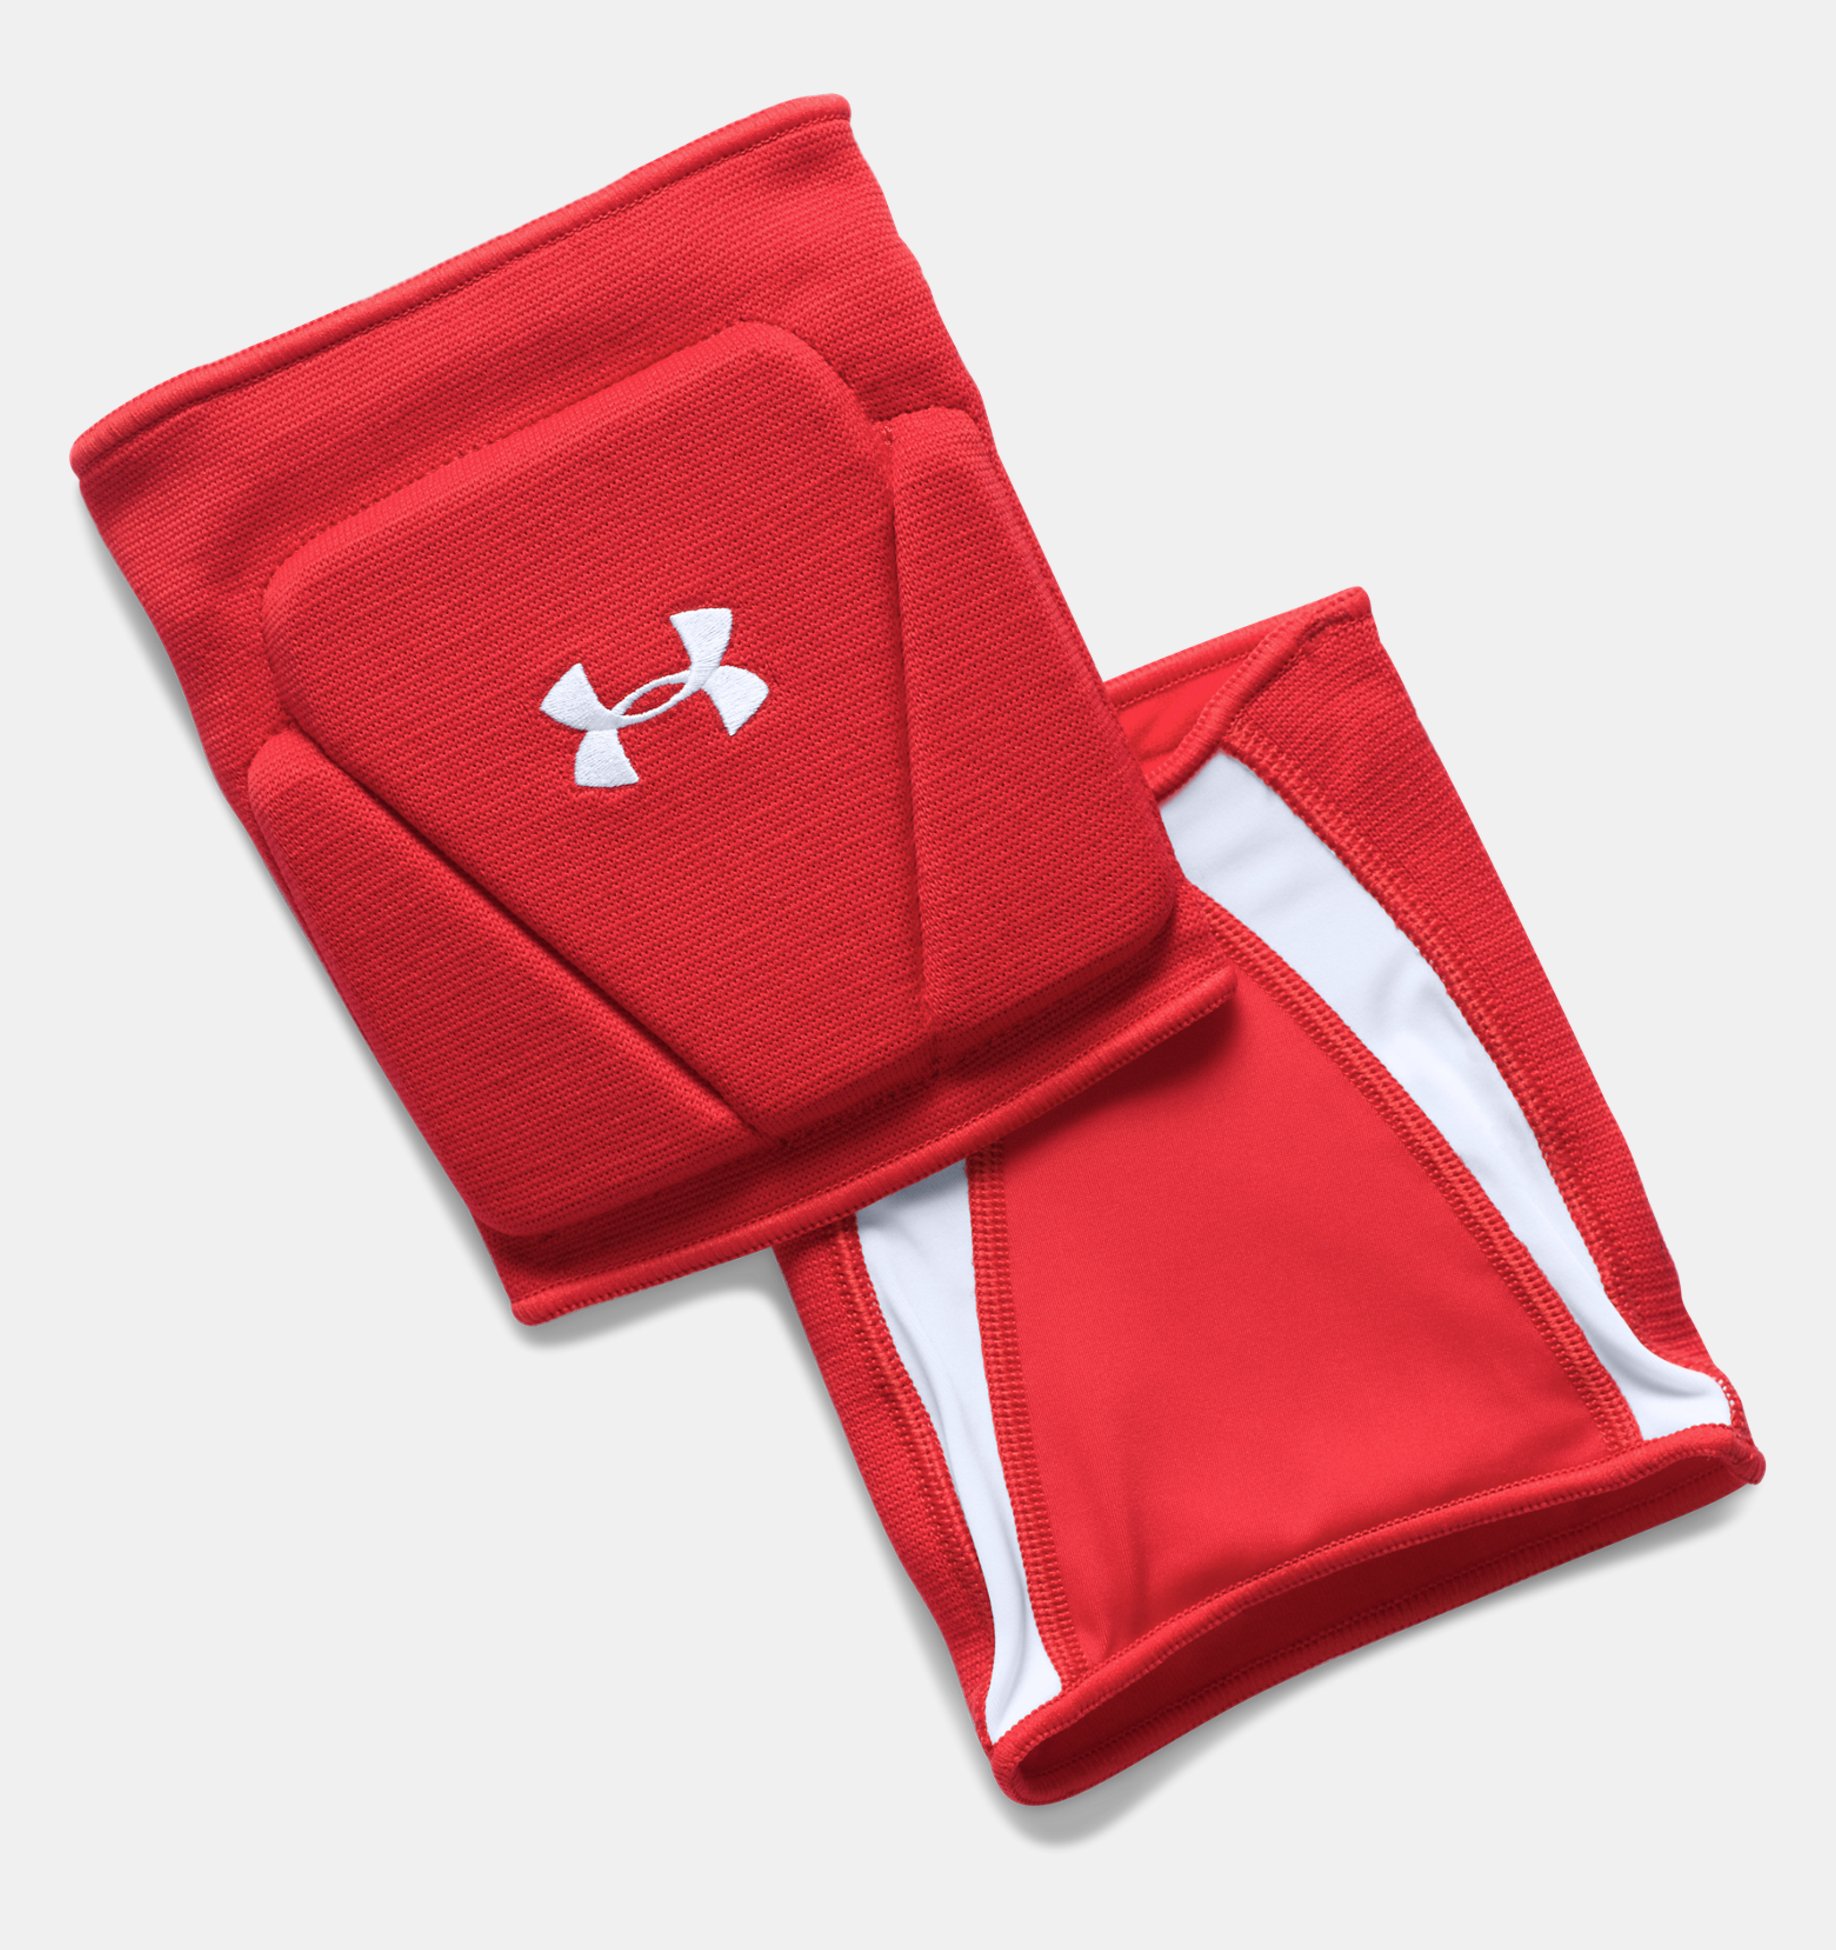 New Under Armour Volleyball Kneepads 